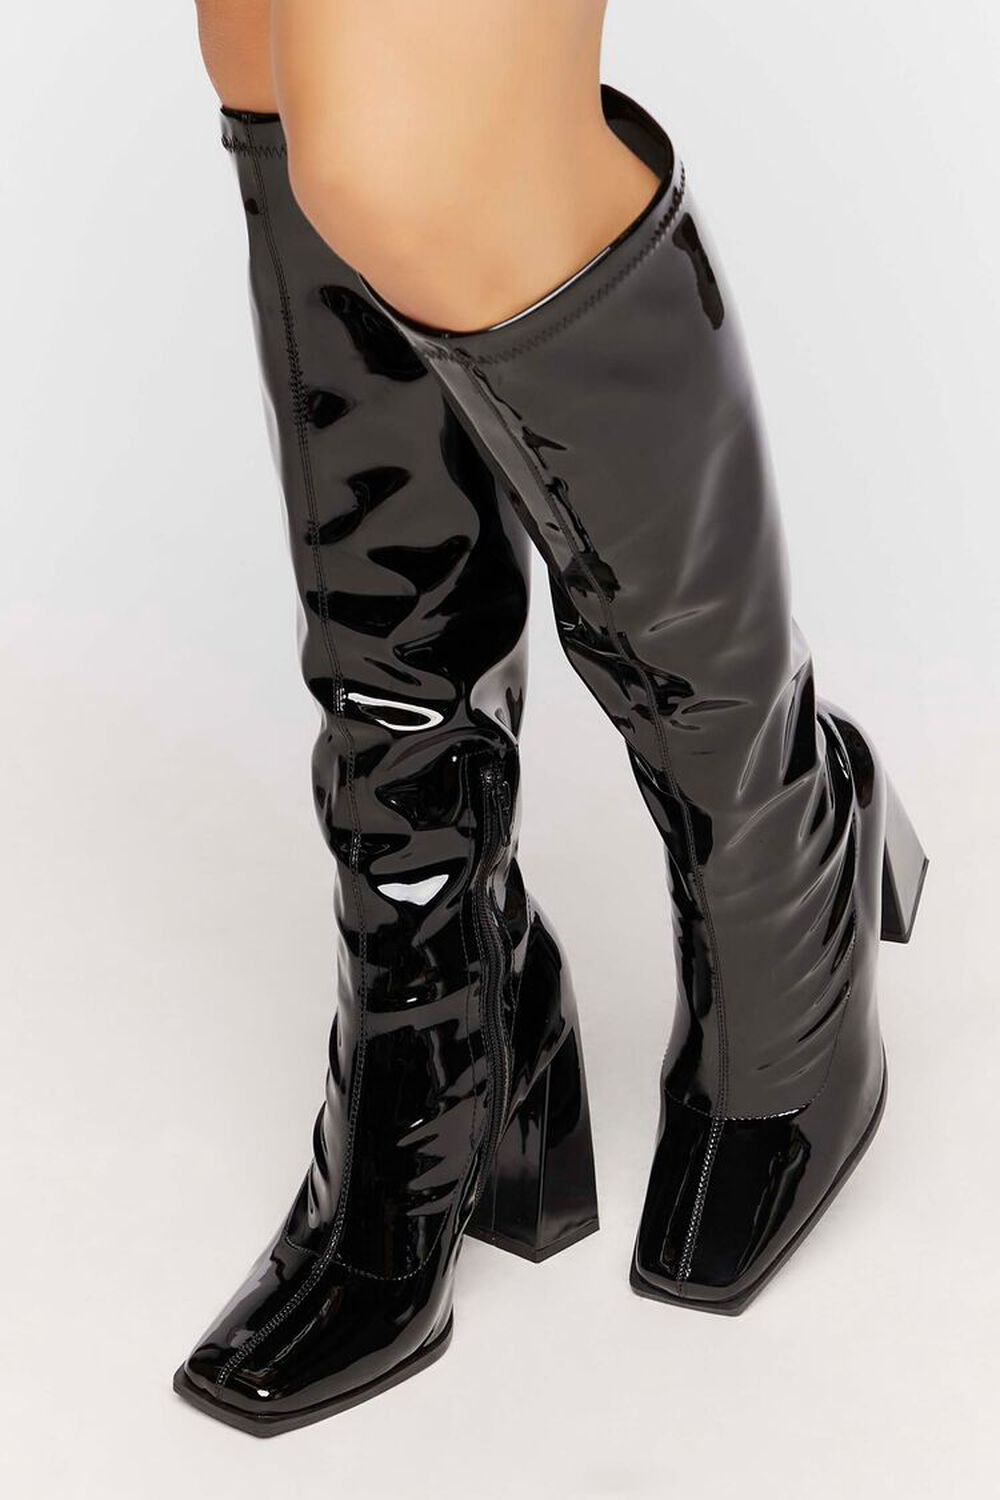 BLACK Faux Patent Leather Knee-High Boots, image 1